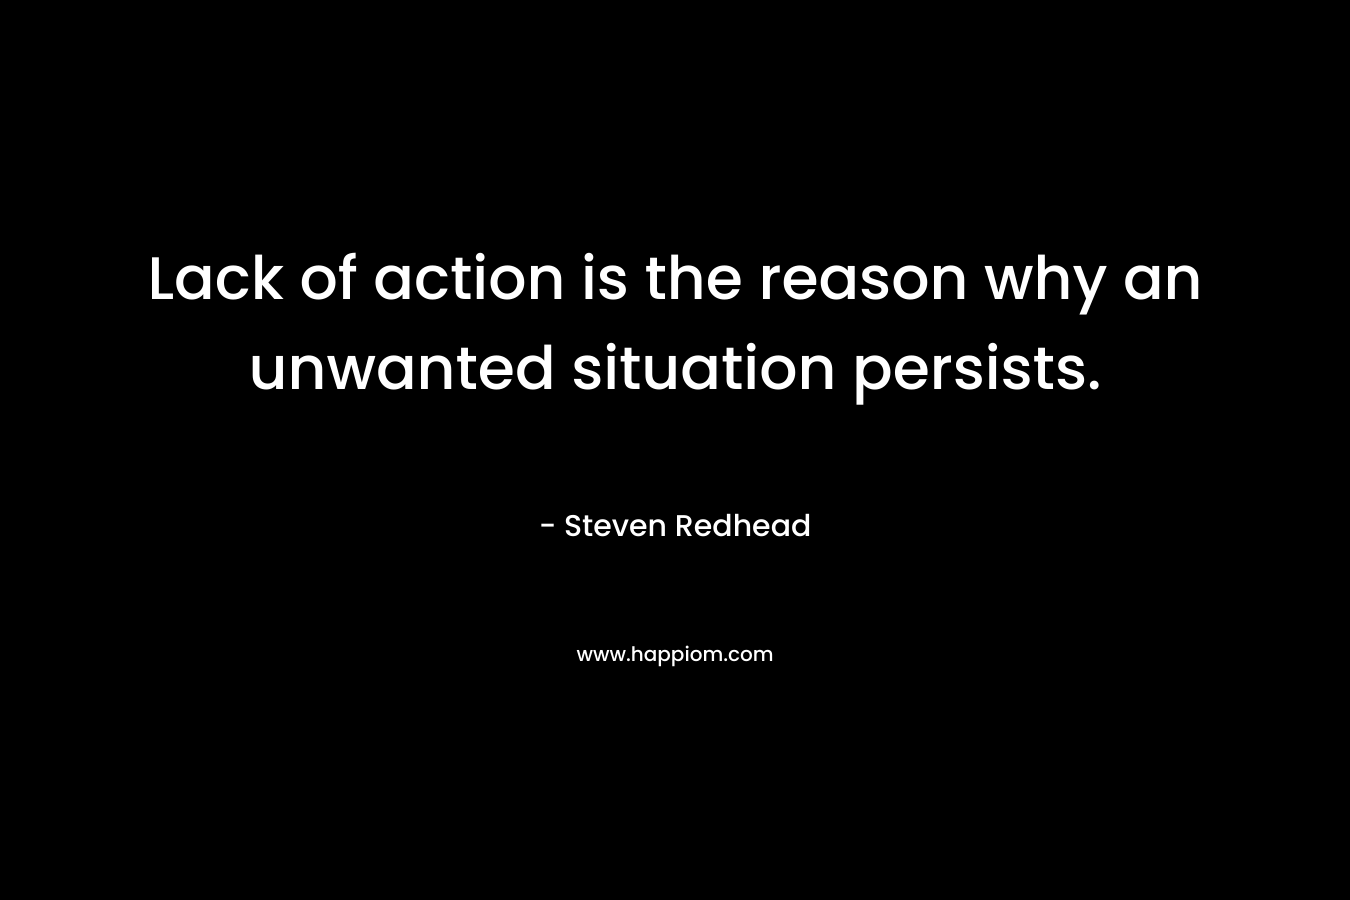 Lack of action is the reason why an unwanted situation persists. – Steven Redhead